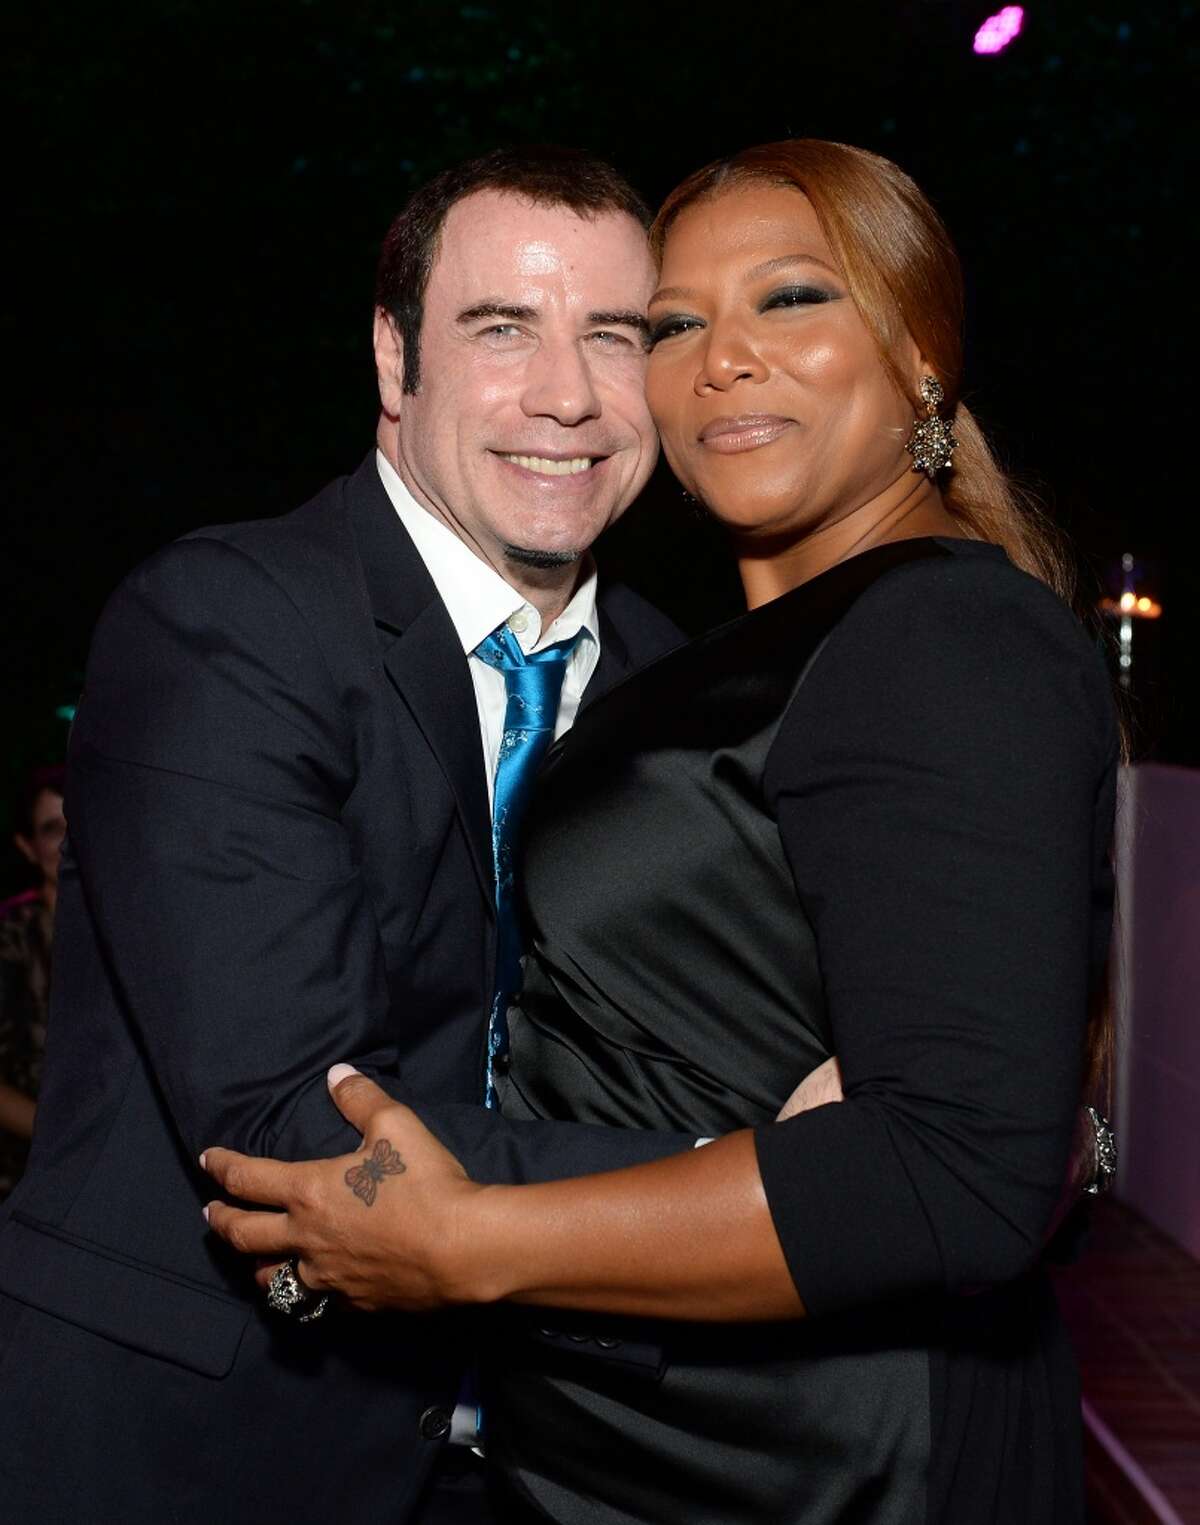 Actor John Travolta (L) and singer Queen Latifah attend the 87th birthday celebration of Tony Bennett and fundraiser for Exploring the Arts, the charity organization founded by Mr. Bennett and wife Susan Benedetto, hosted by Ted Sarandos & Nicole Avant Sarandos among celebrity friends and family on August 3, 2013 in Beverly Hills, California.